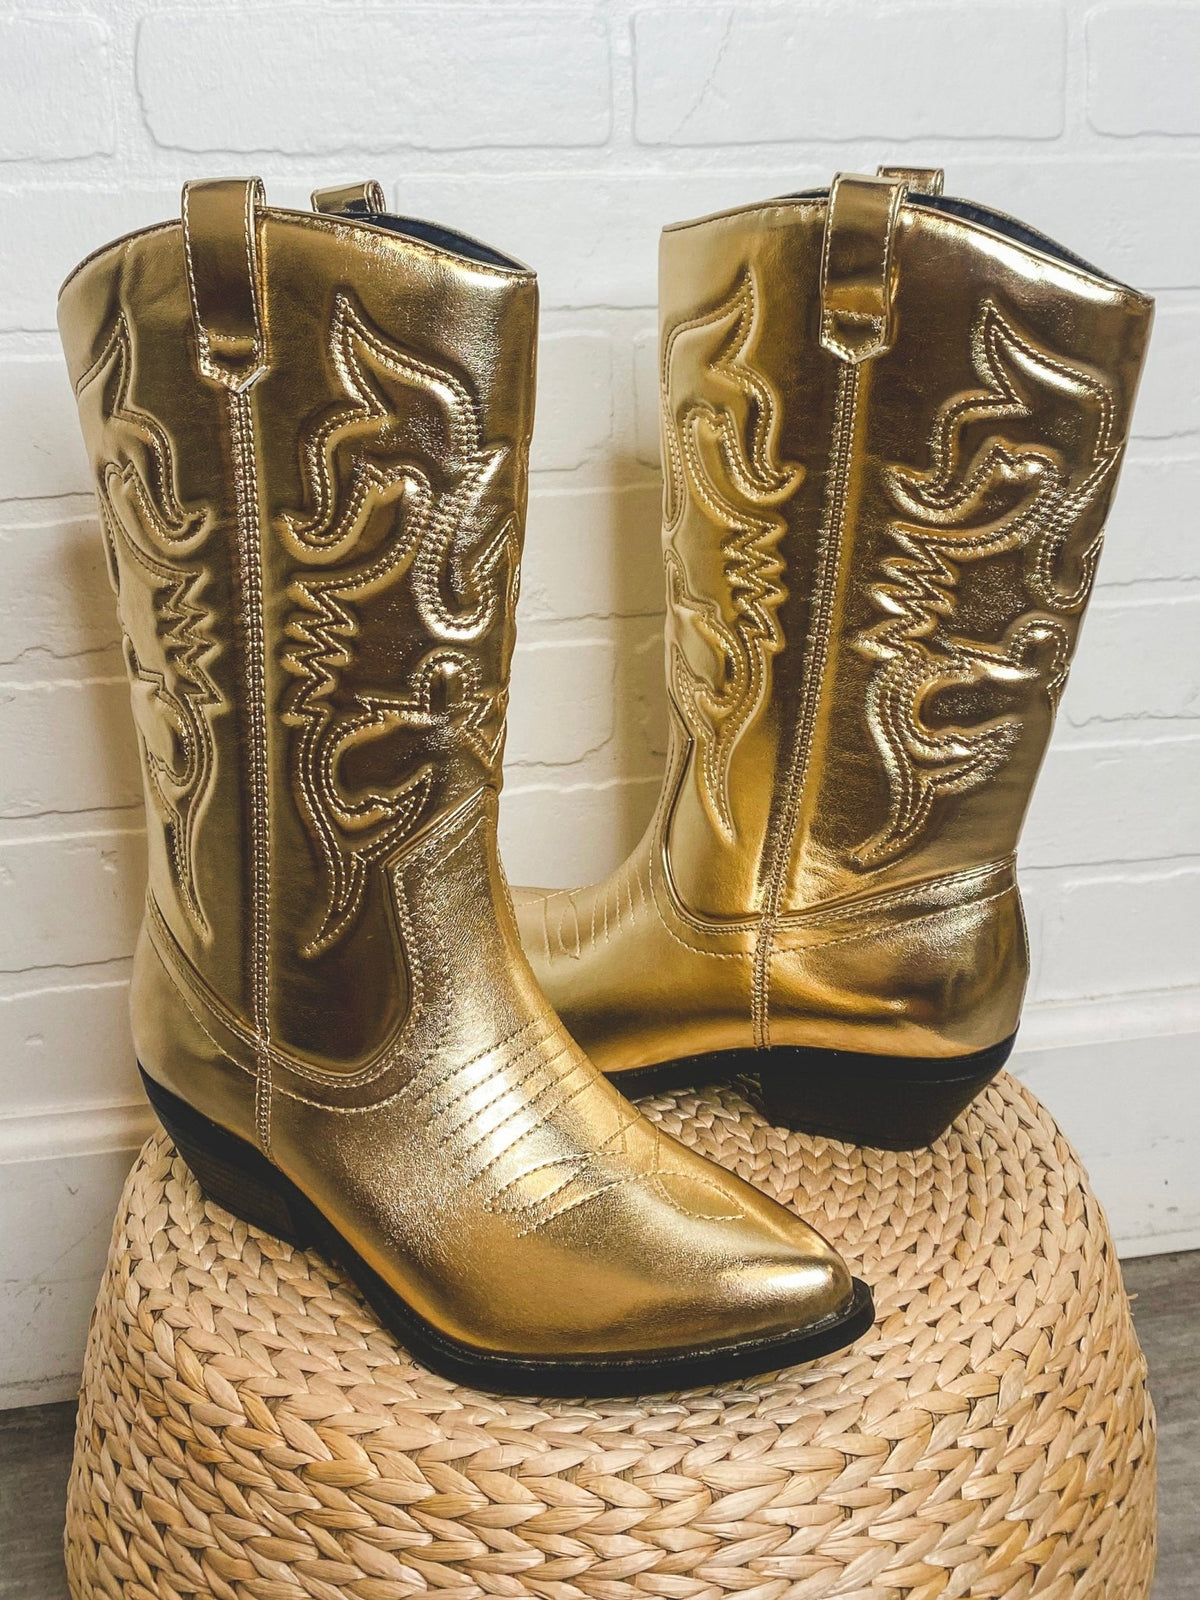 Reno cowboy boots gold - Cute Shoes - Trendy Shoes at Lush Fashion Lounge Boutique in Oklahoma City